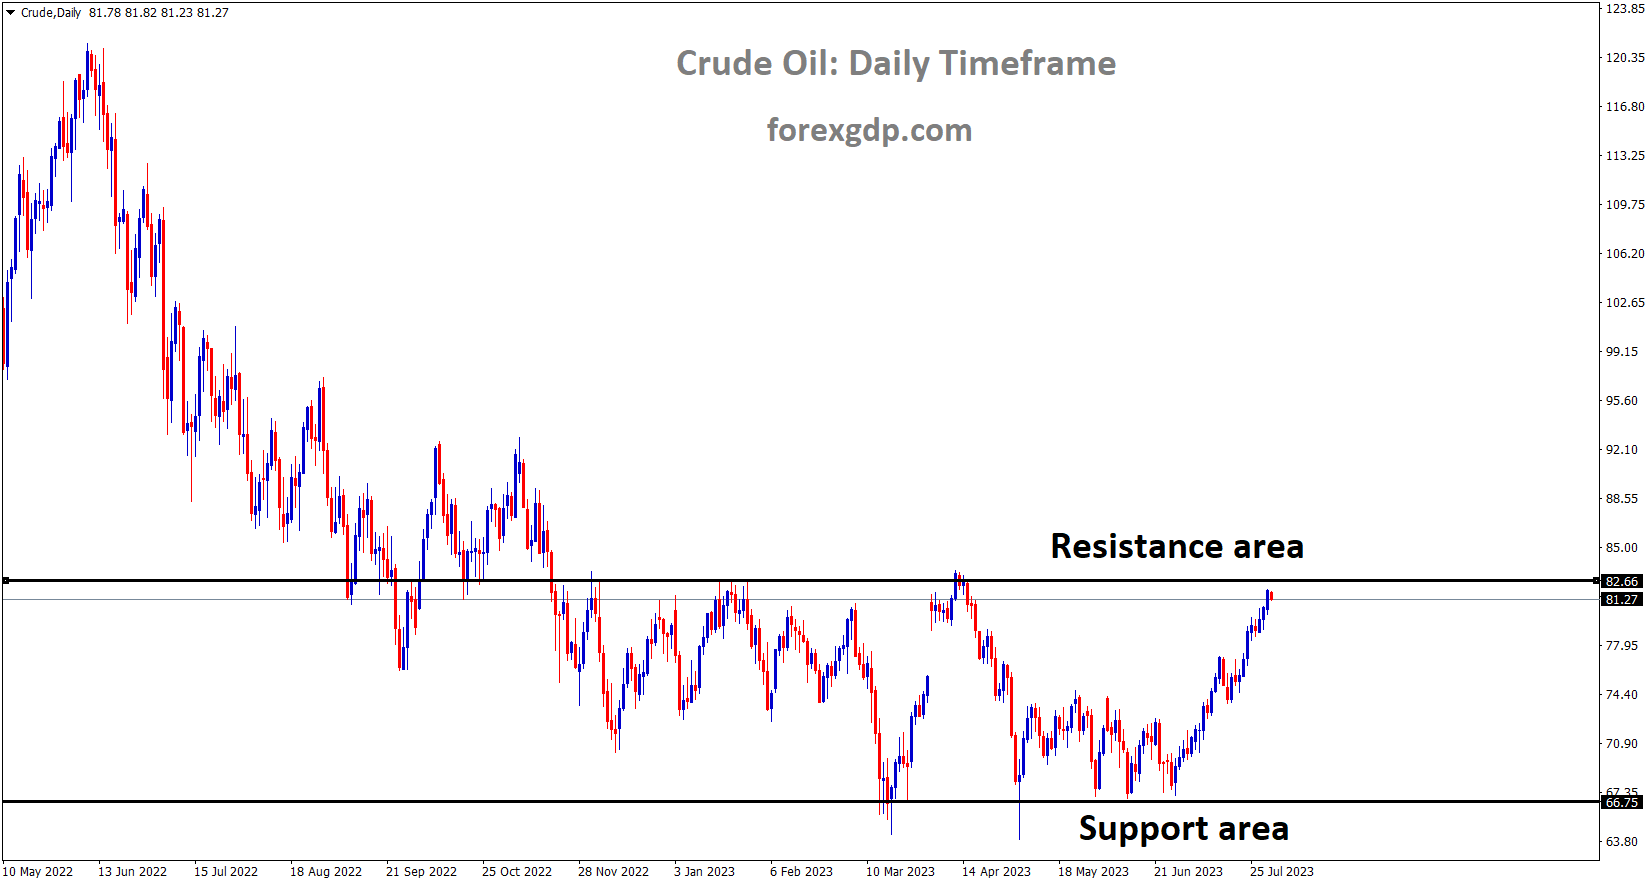 Crude Oil price is moving in the Box pattern and the market has reached the resistance area of the pattern